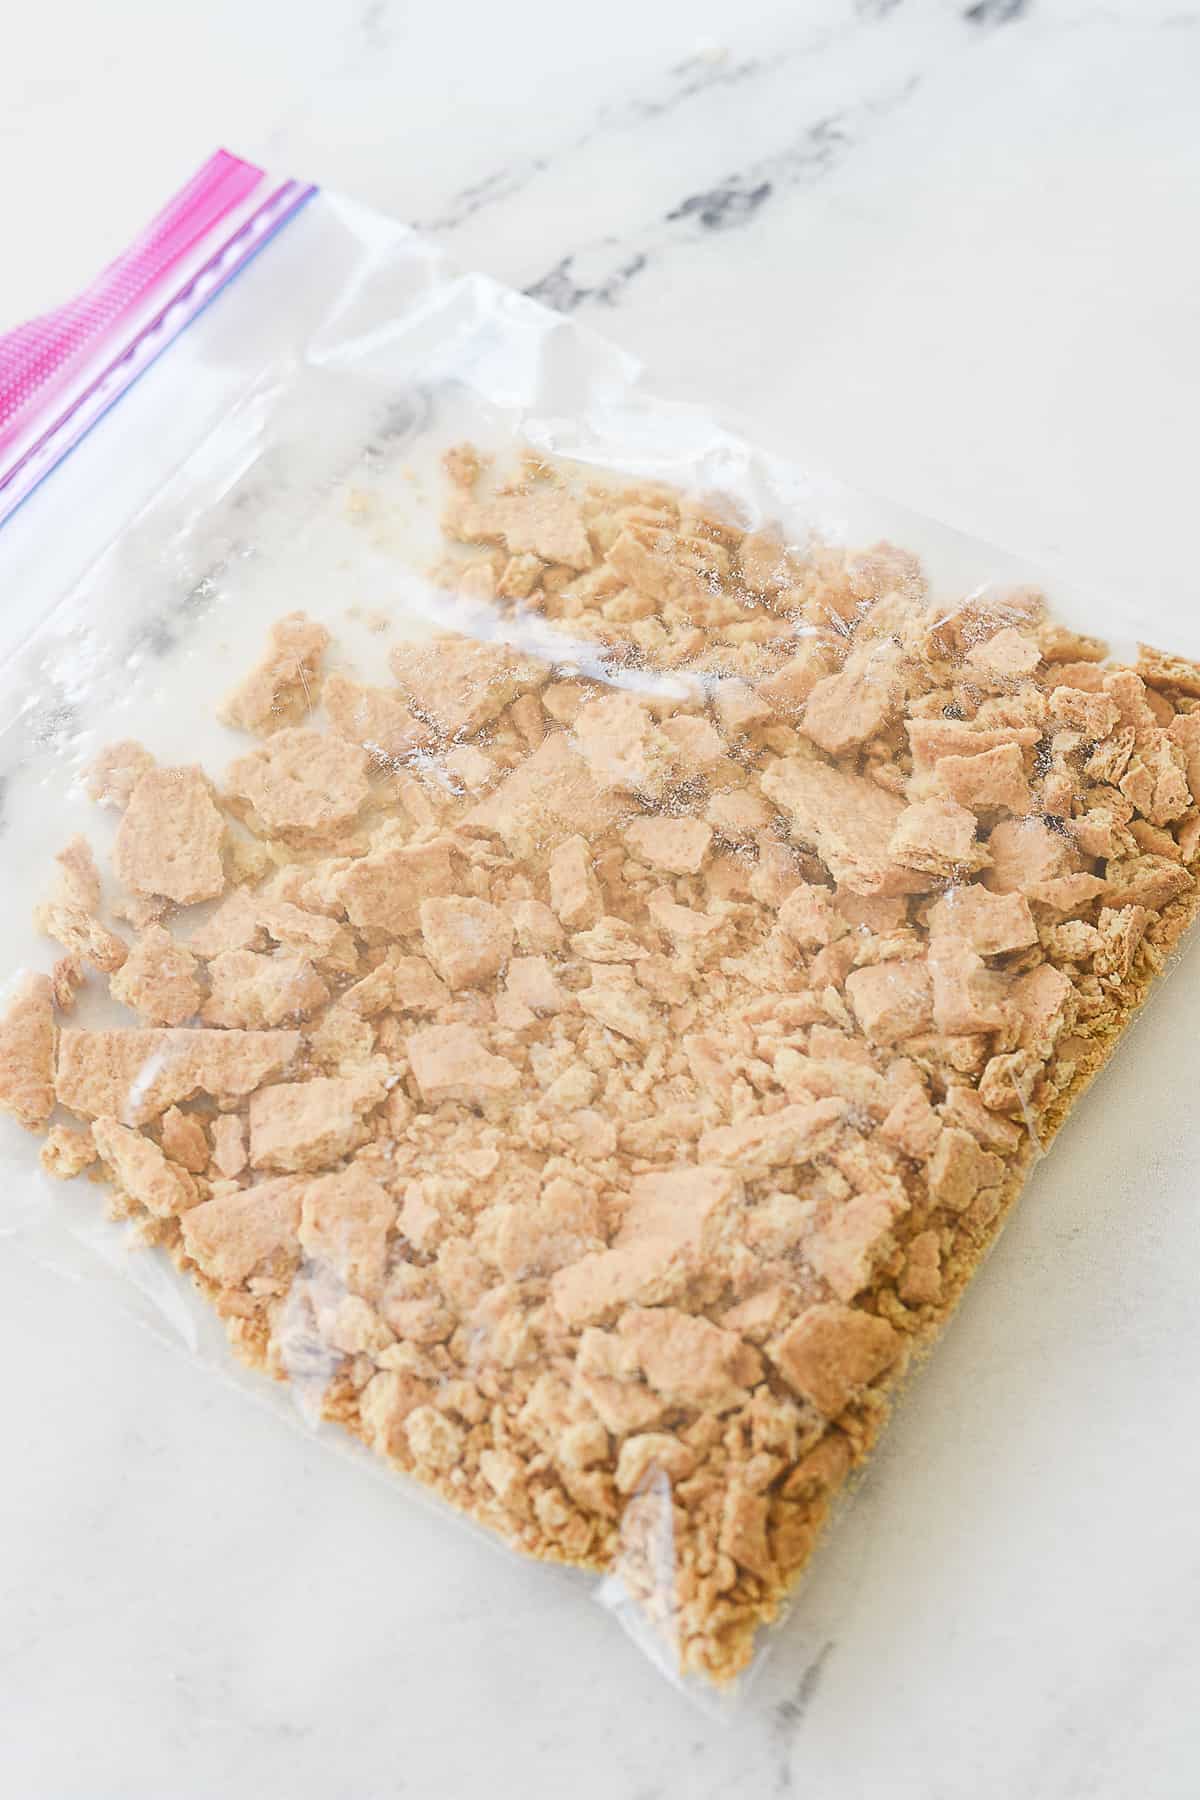 crushed graham cracker crumbs in a bag